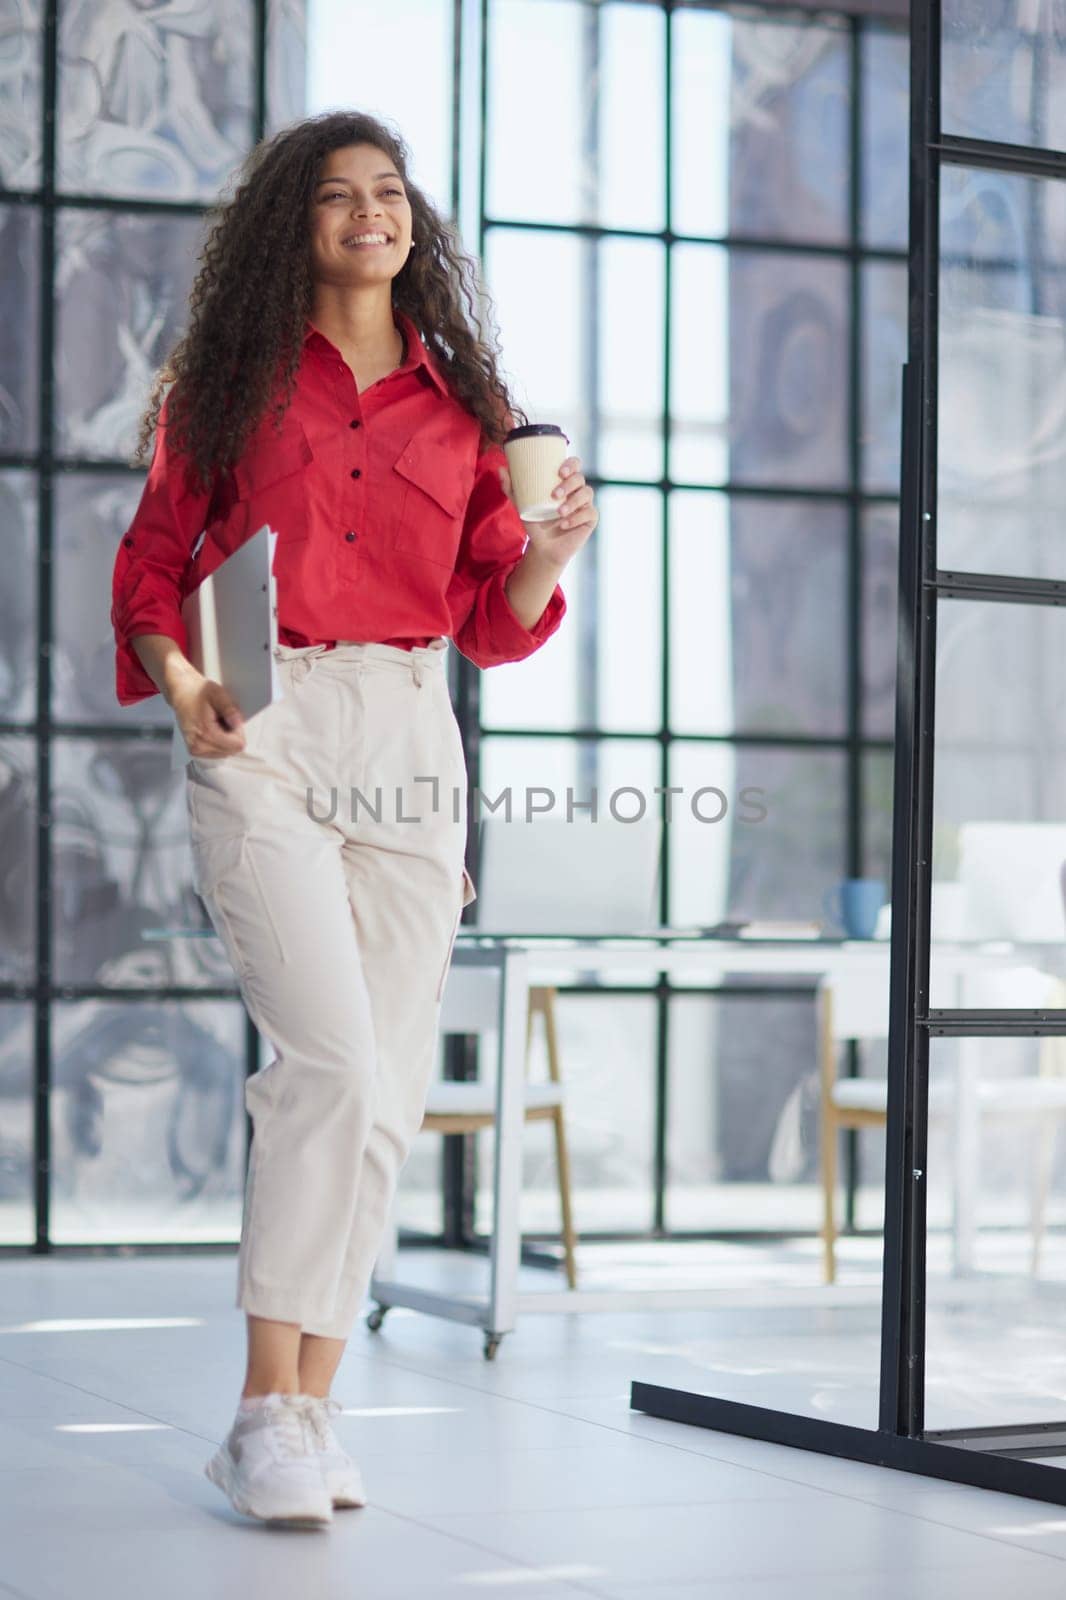 Im ready to start the day. an attractive young businesswoman standing alone in the office with her arms folded